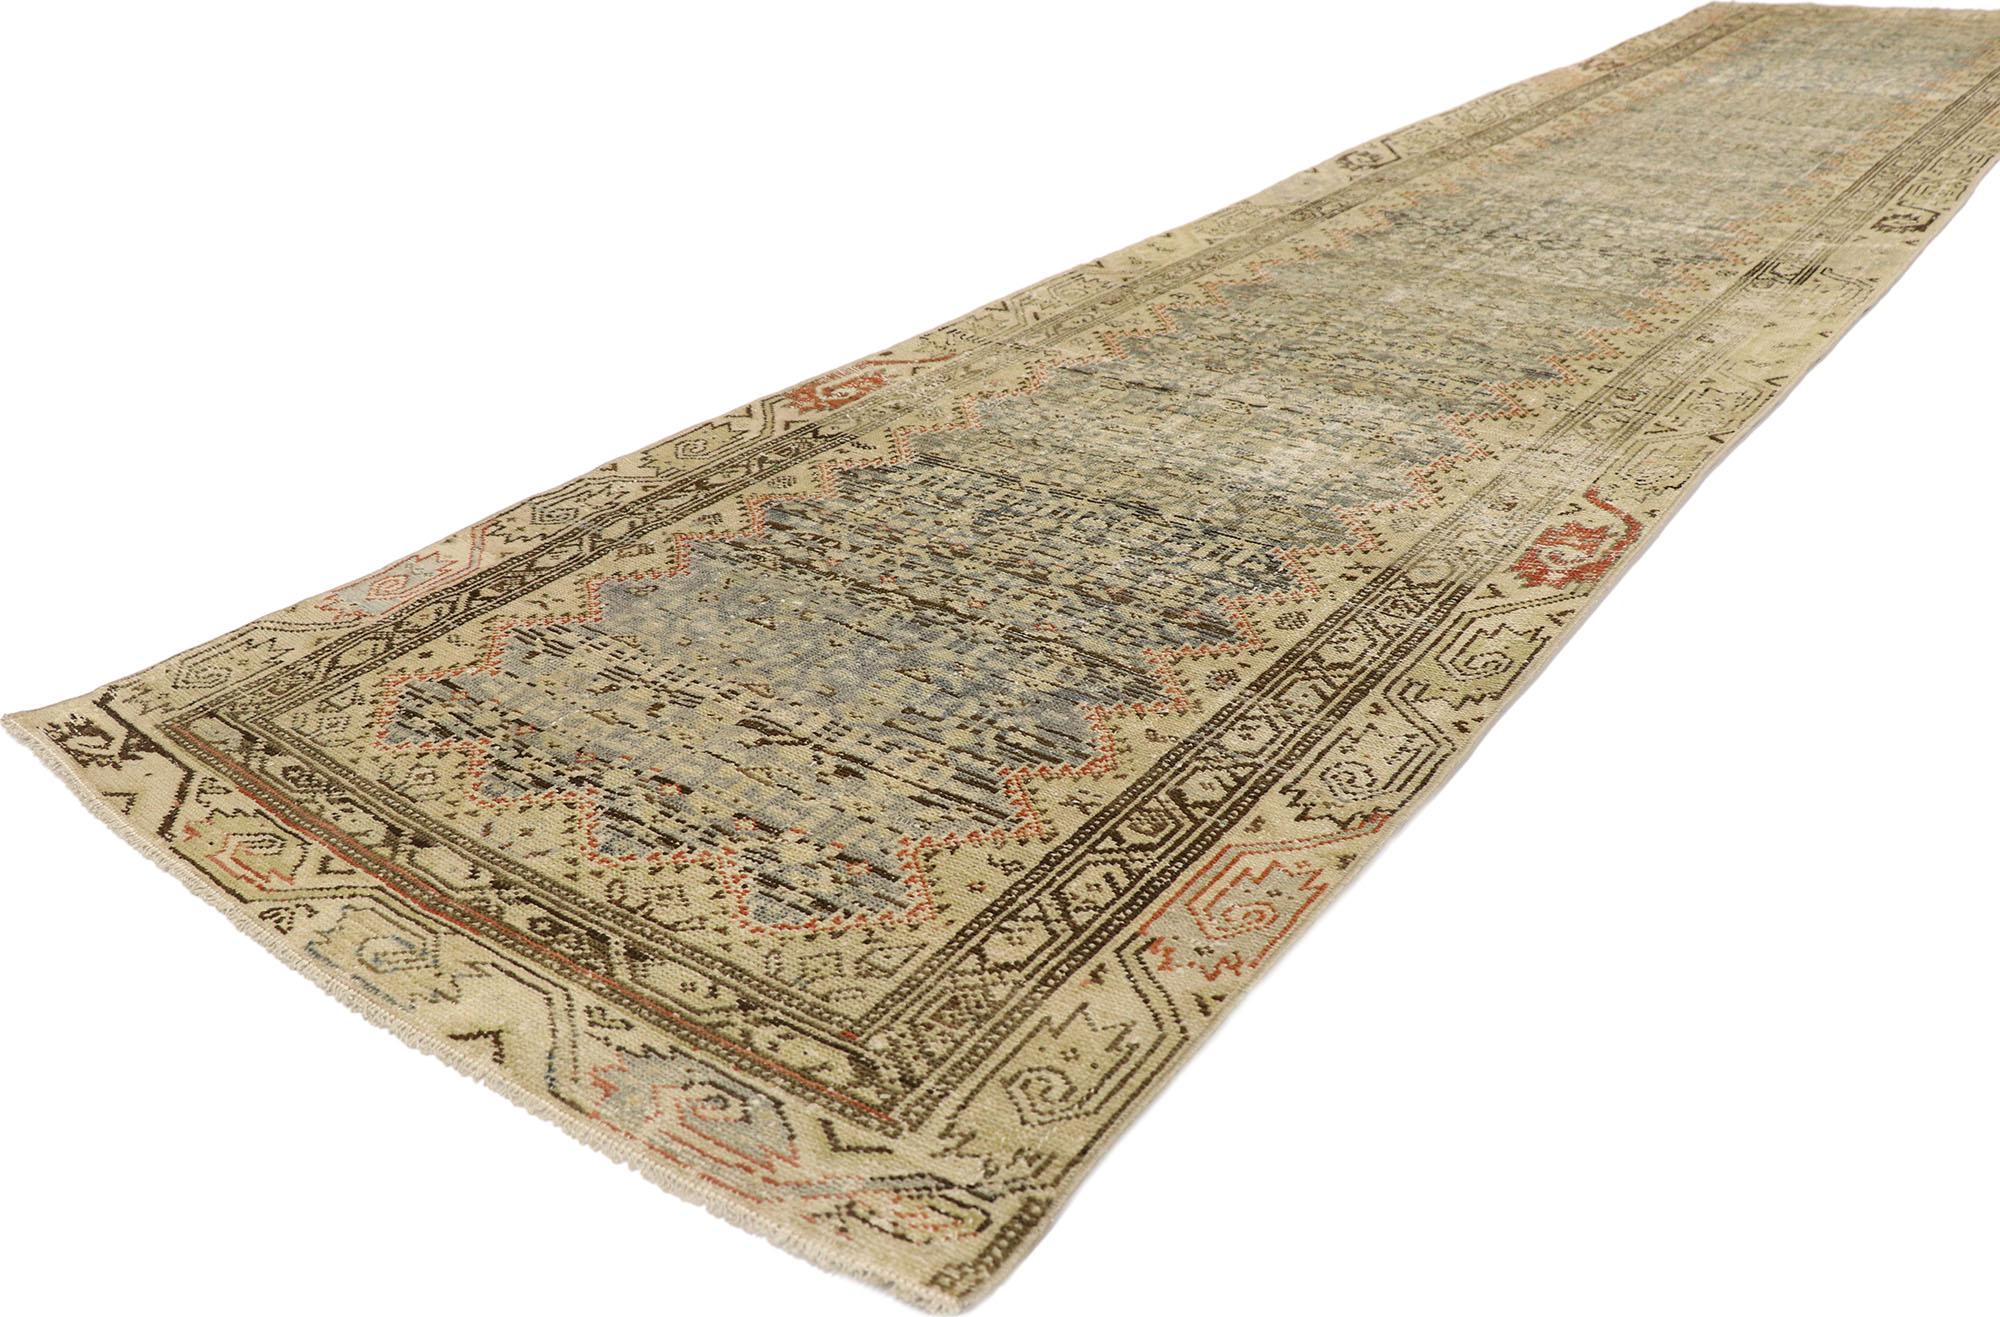 53660 Distressed Antique-Worn Persian Malayer Rug, 02'10 x 12'08.
​Step into a world of laid-back luxury and faded glamour with this  hand knotted wool antique-worn Persian Malalyer rug runner. The richly striated field boasts a beautiful botanical